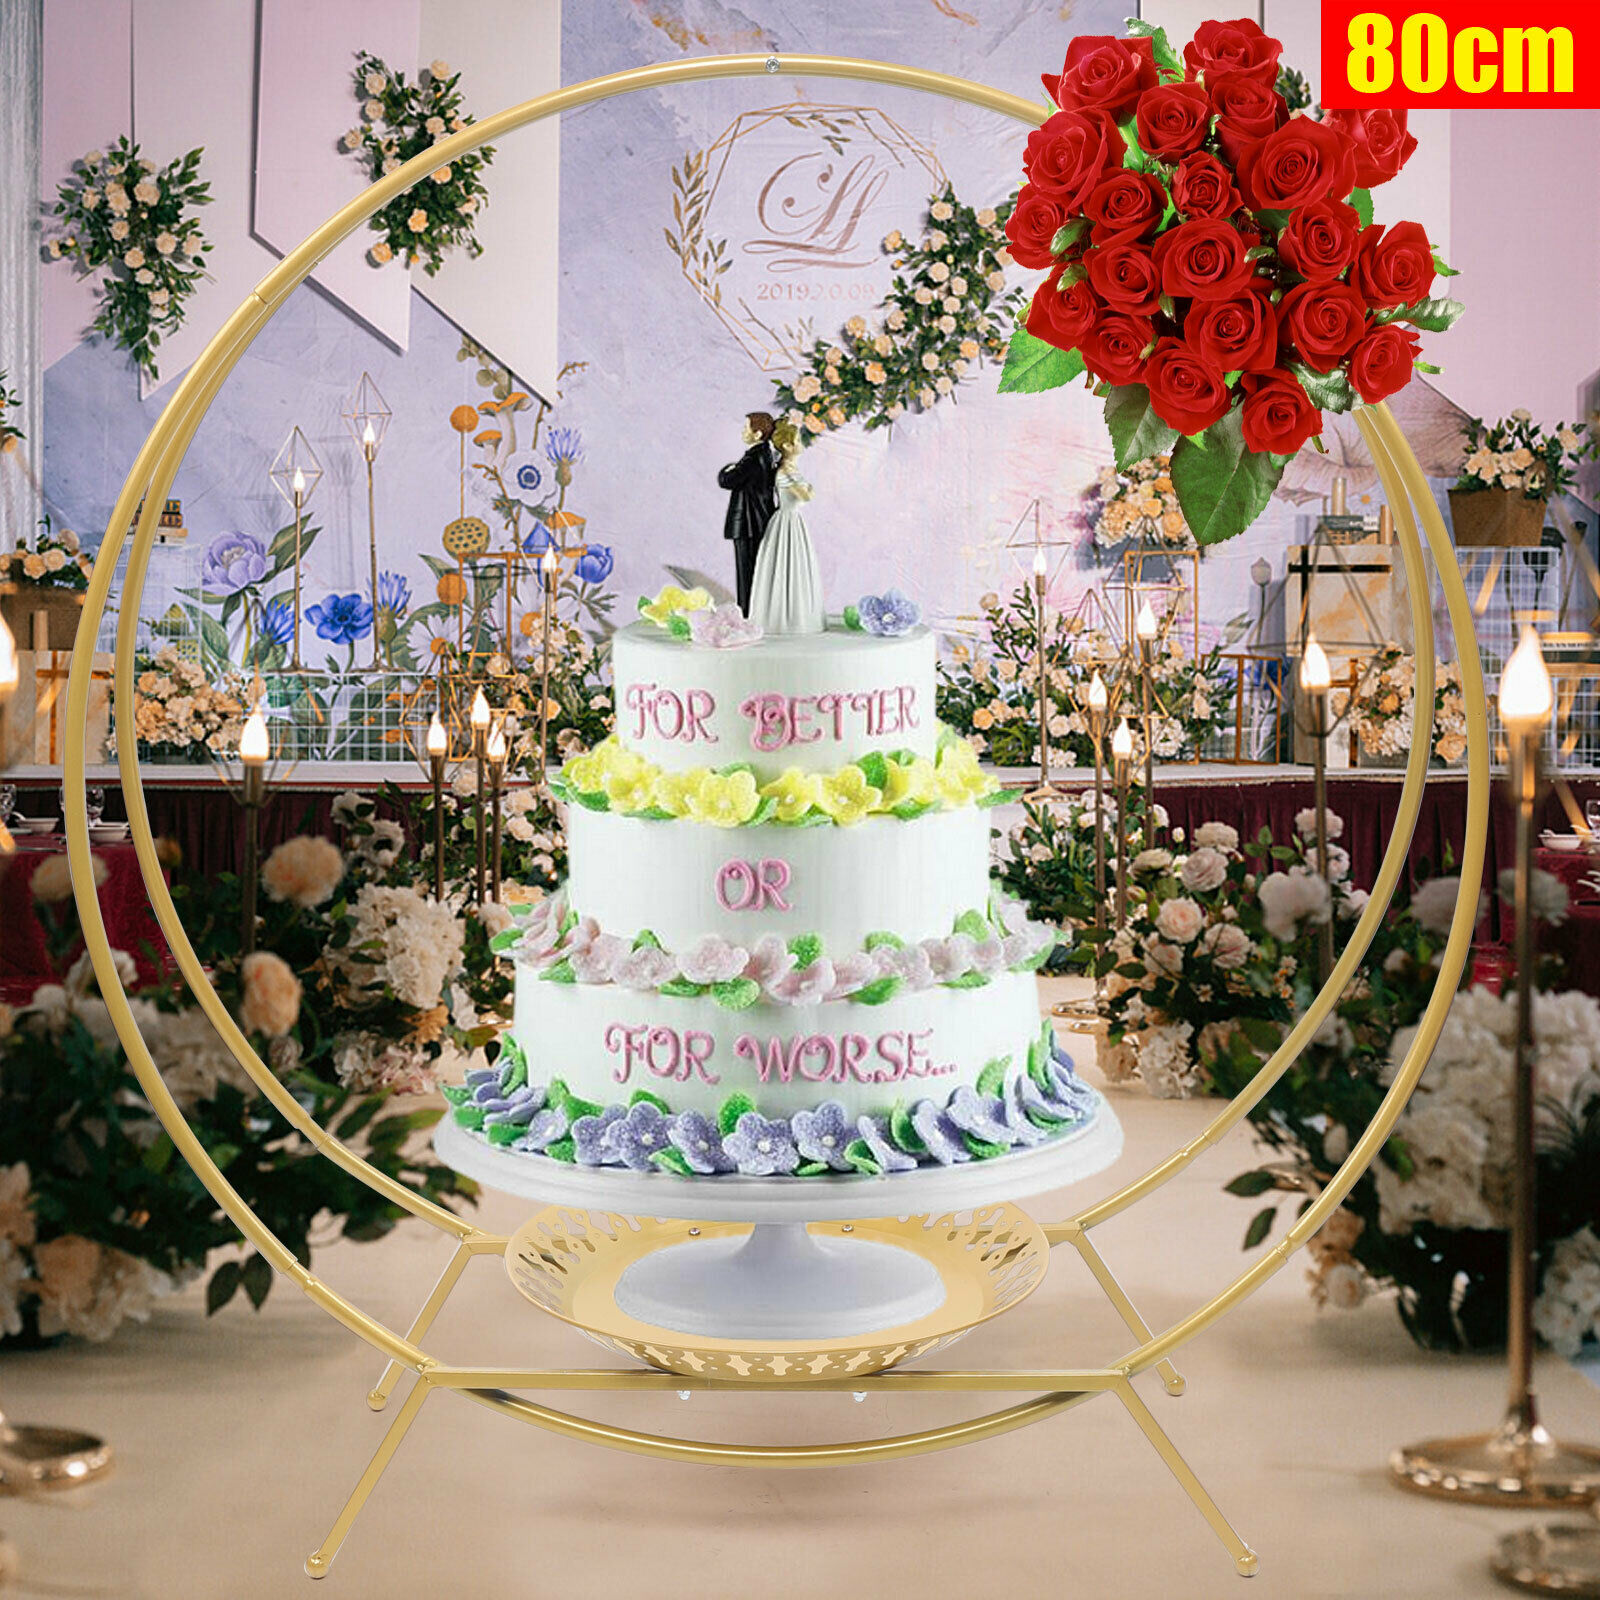 80cm Double Gold Hoop Cake Stand Balloons Arch Rack Wedding Events Decoration